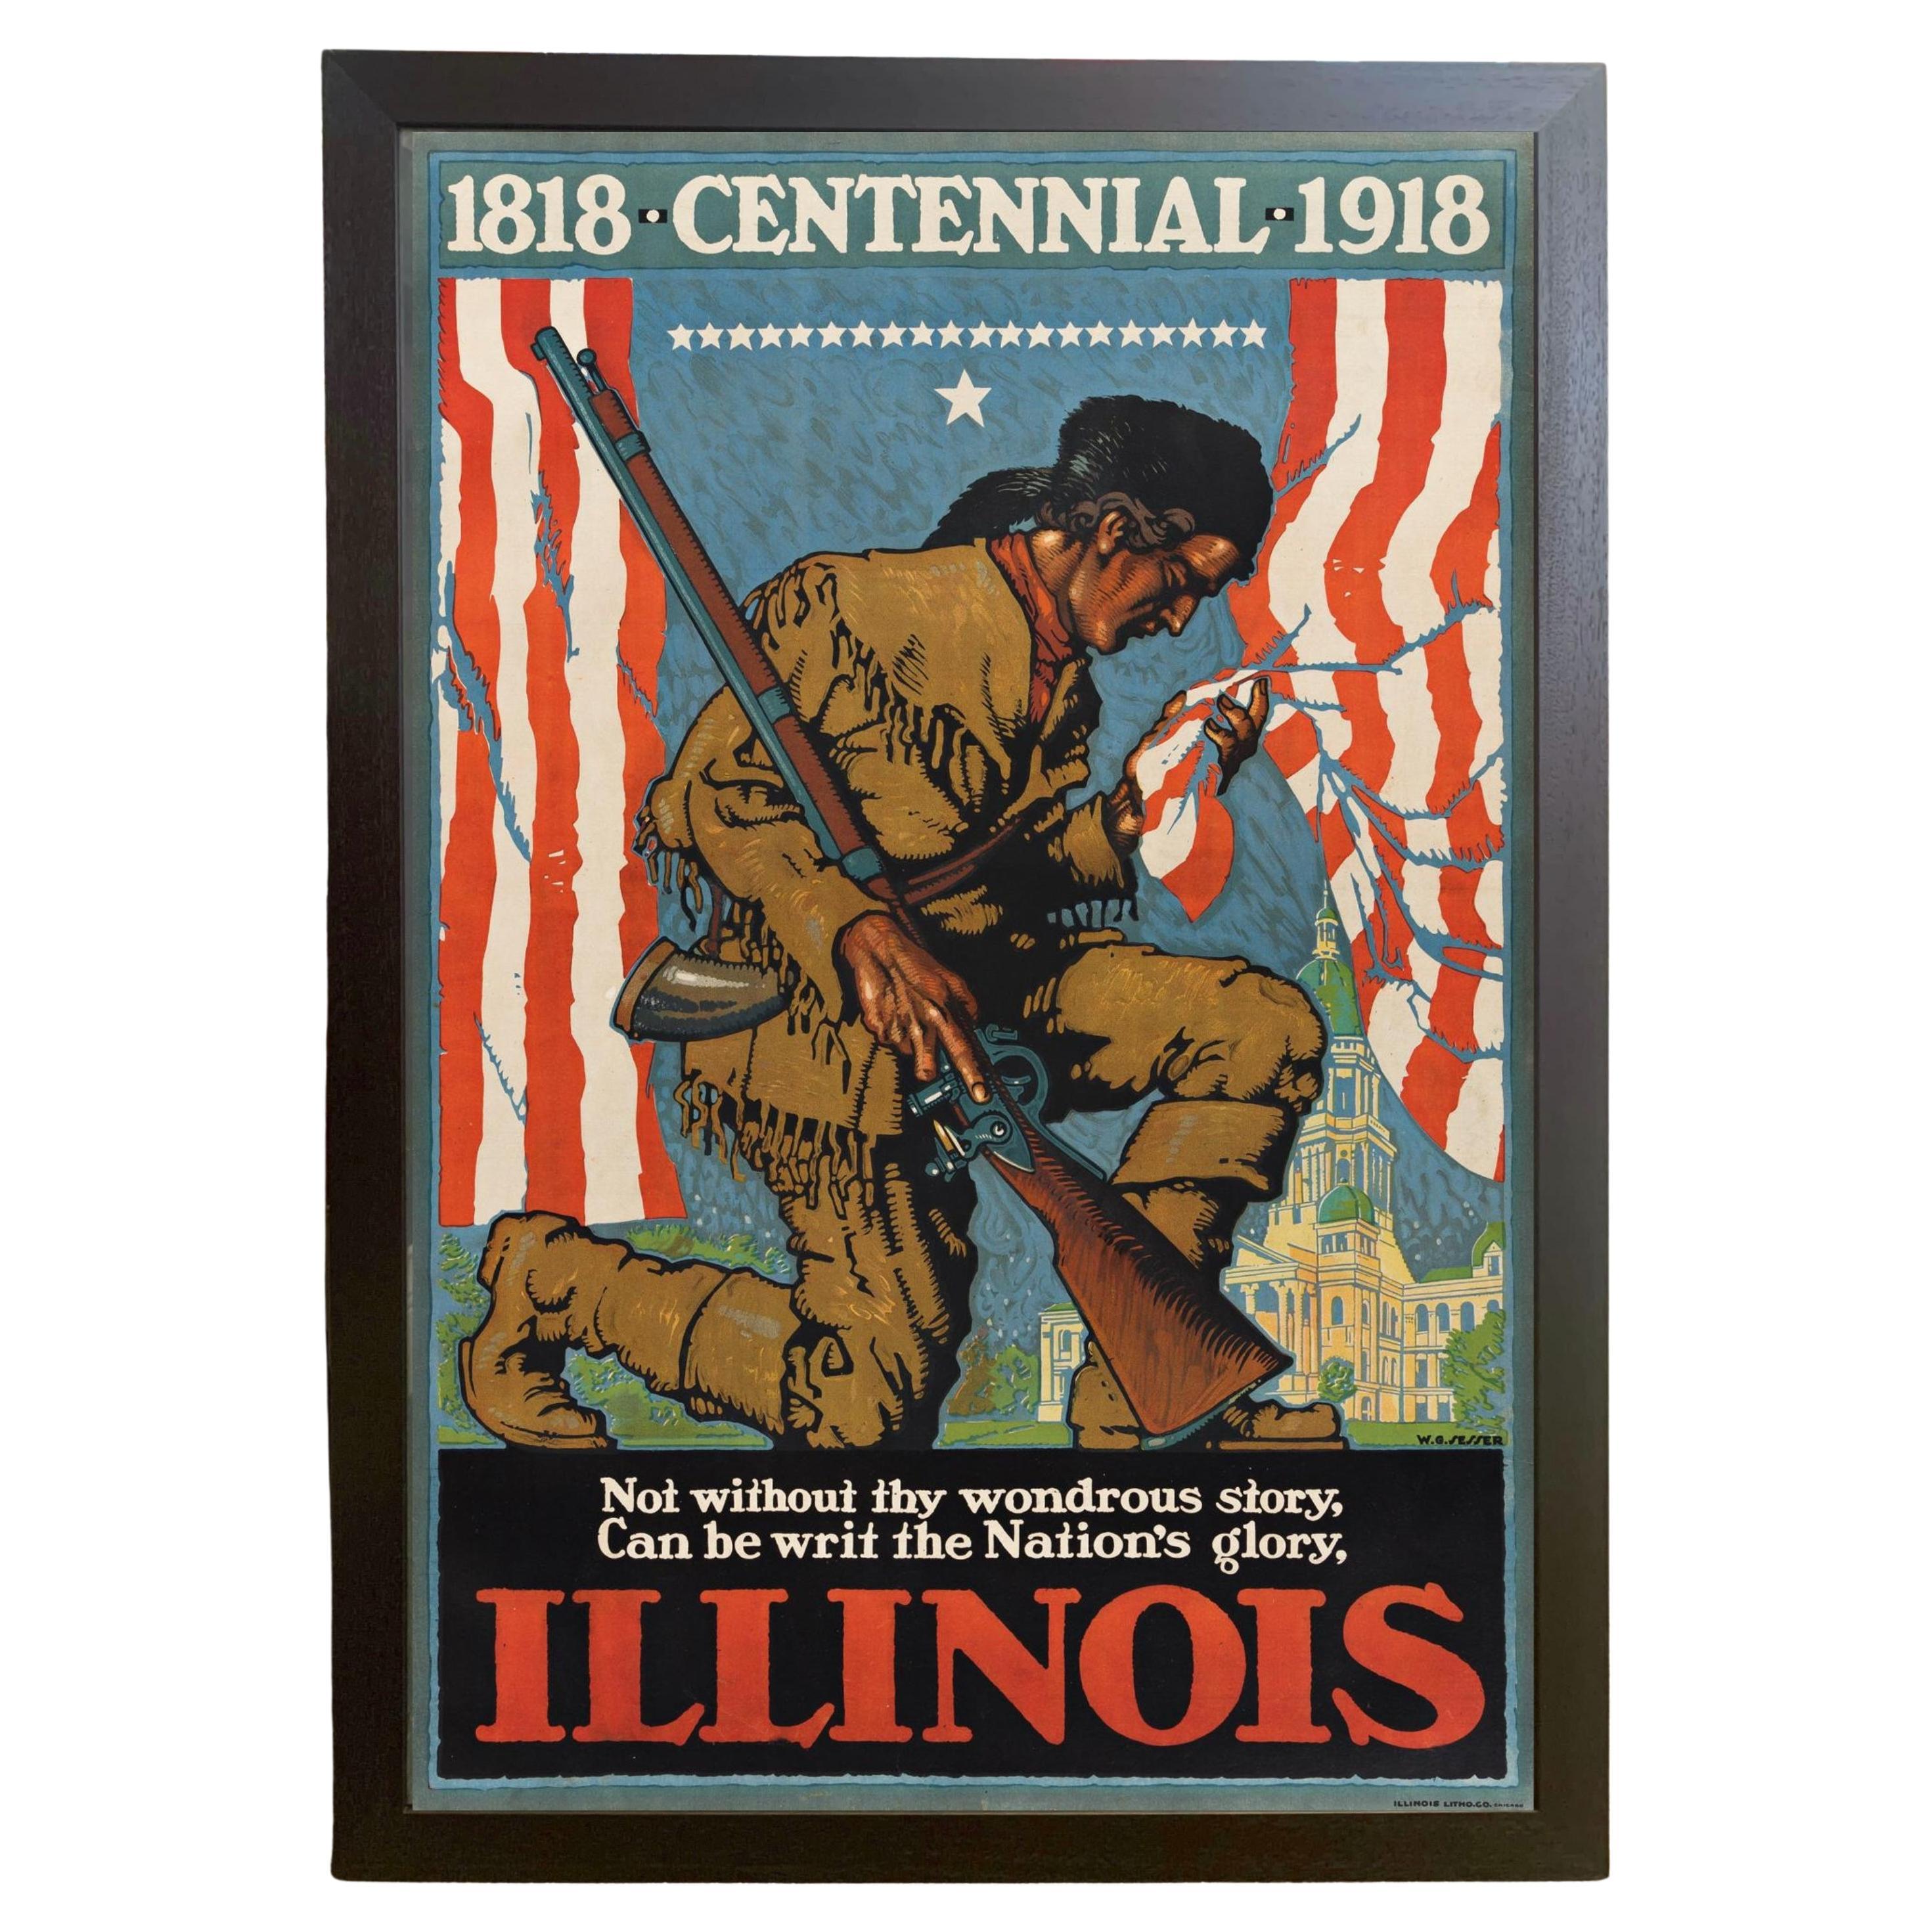 "Illinois. 1818 Centennial 1918." Vintage Poster by Willy Sesser, 1918 For Sale